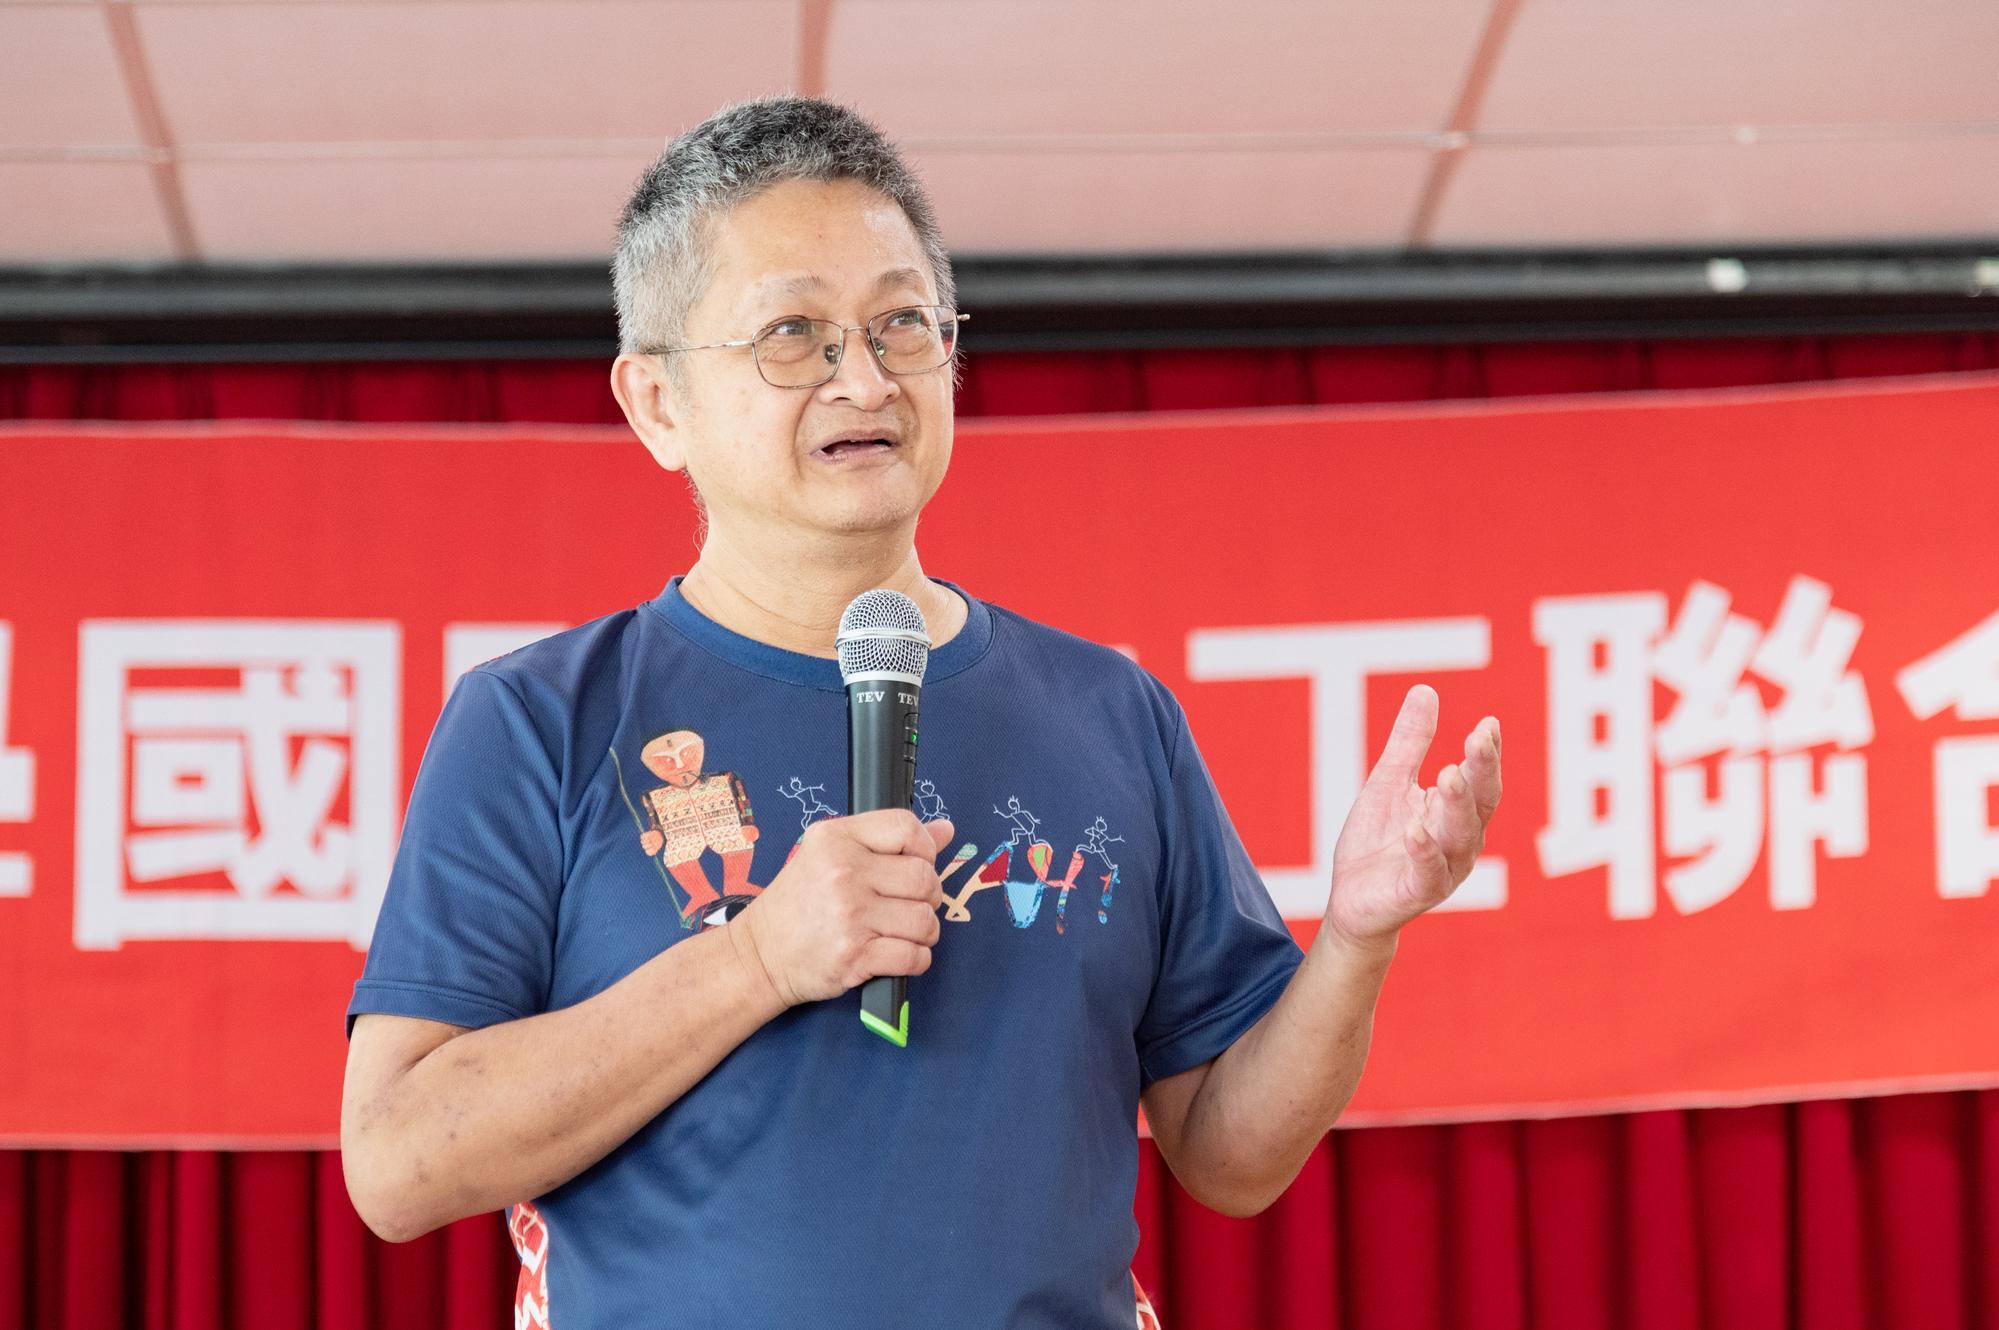 Zhi-da Song (宋智達), general manager of the Taiwan Imaging-Tek Corporation, extends his sincere appreciation to the NTHU international volunteer teams for bringing the love of Taiwan to the world.